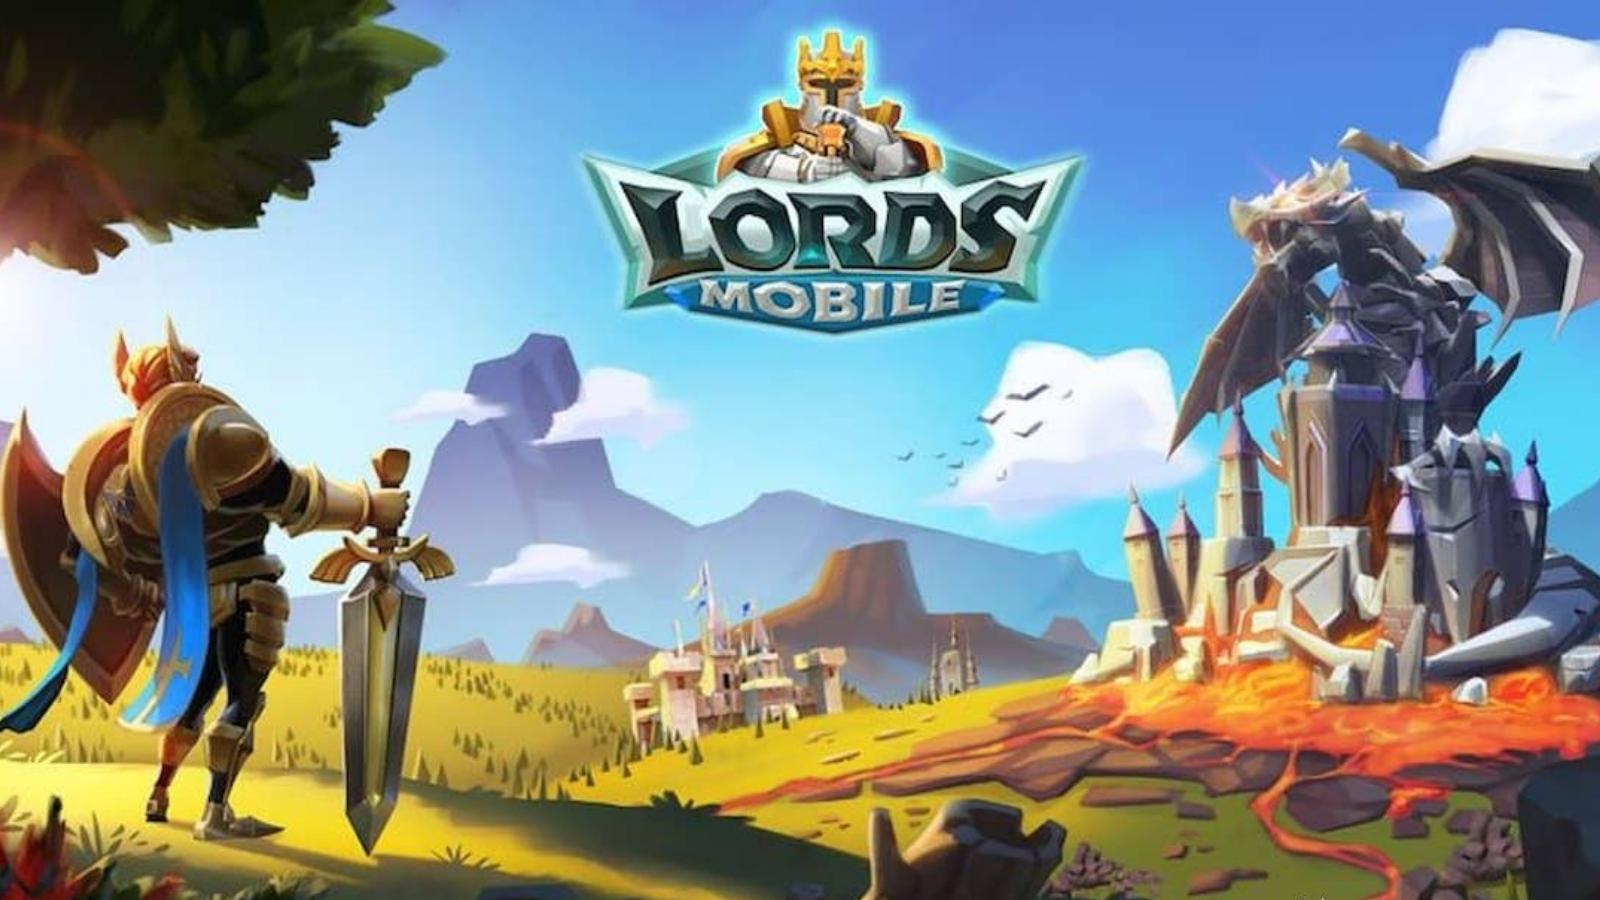 Lords mobile - Claim Free 3 codes from livestream !! : r/lordsmobile